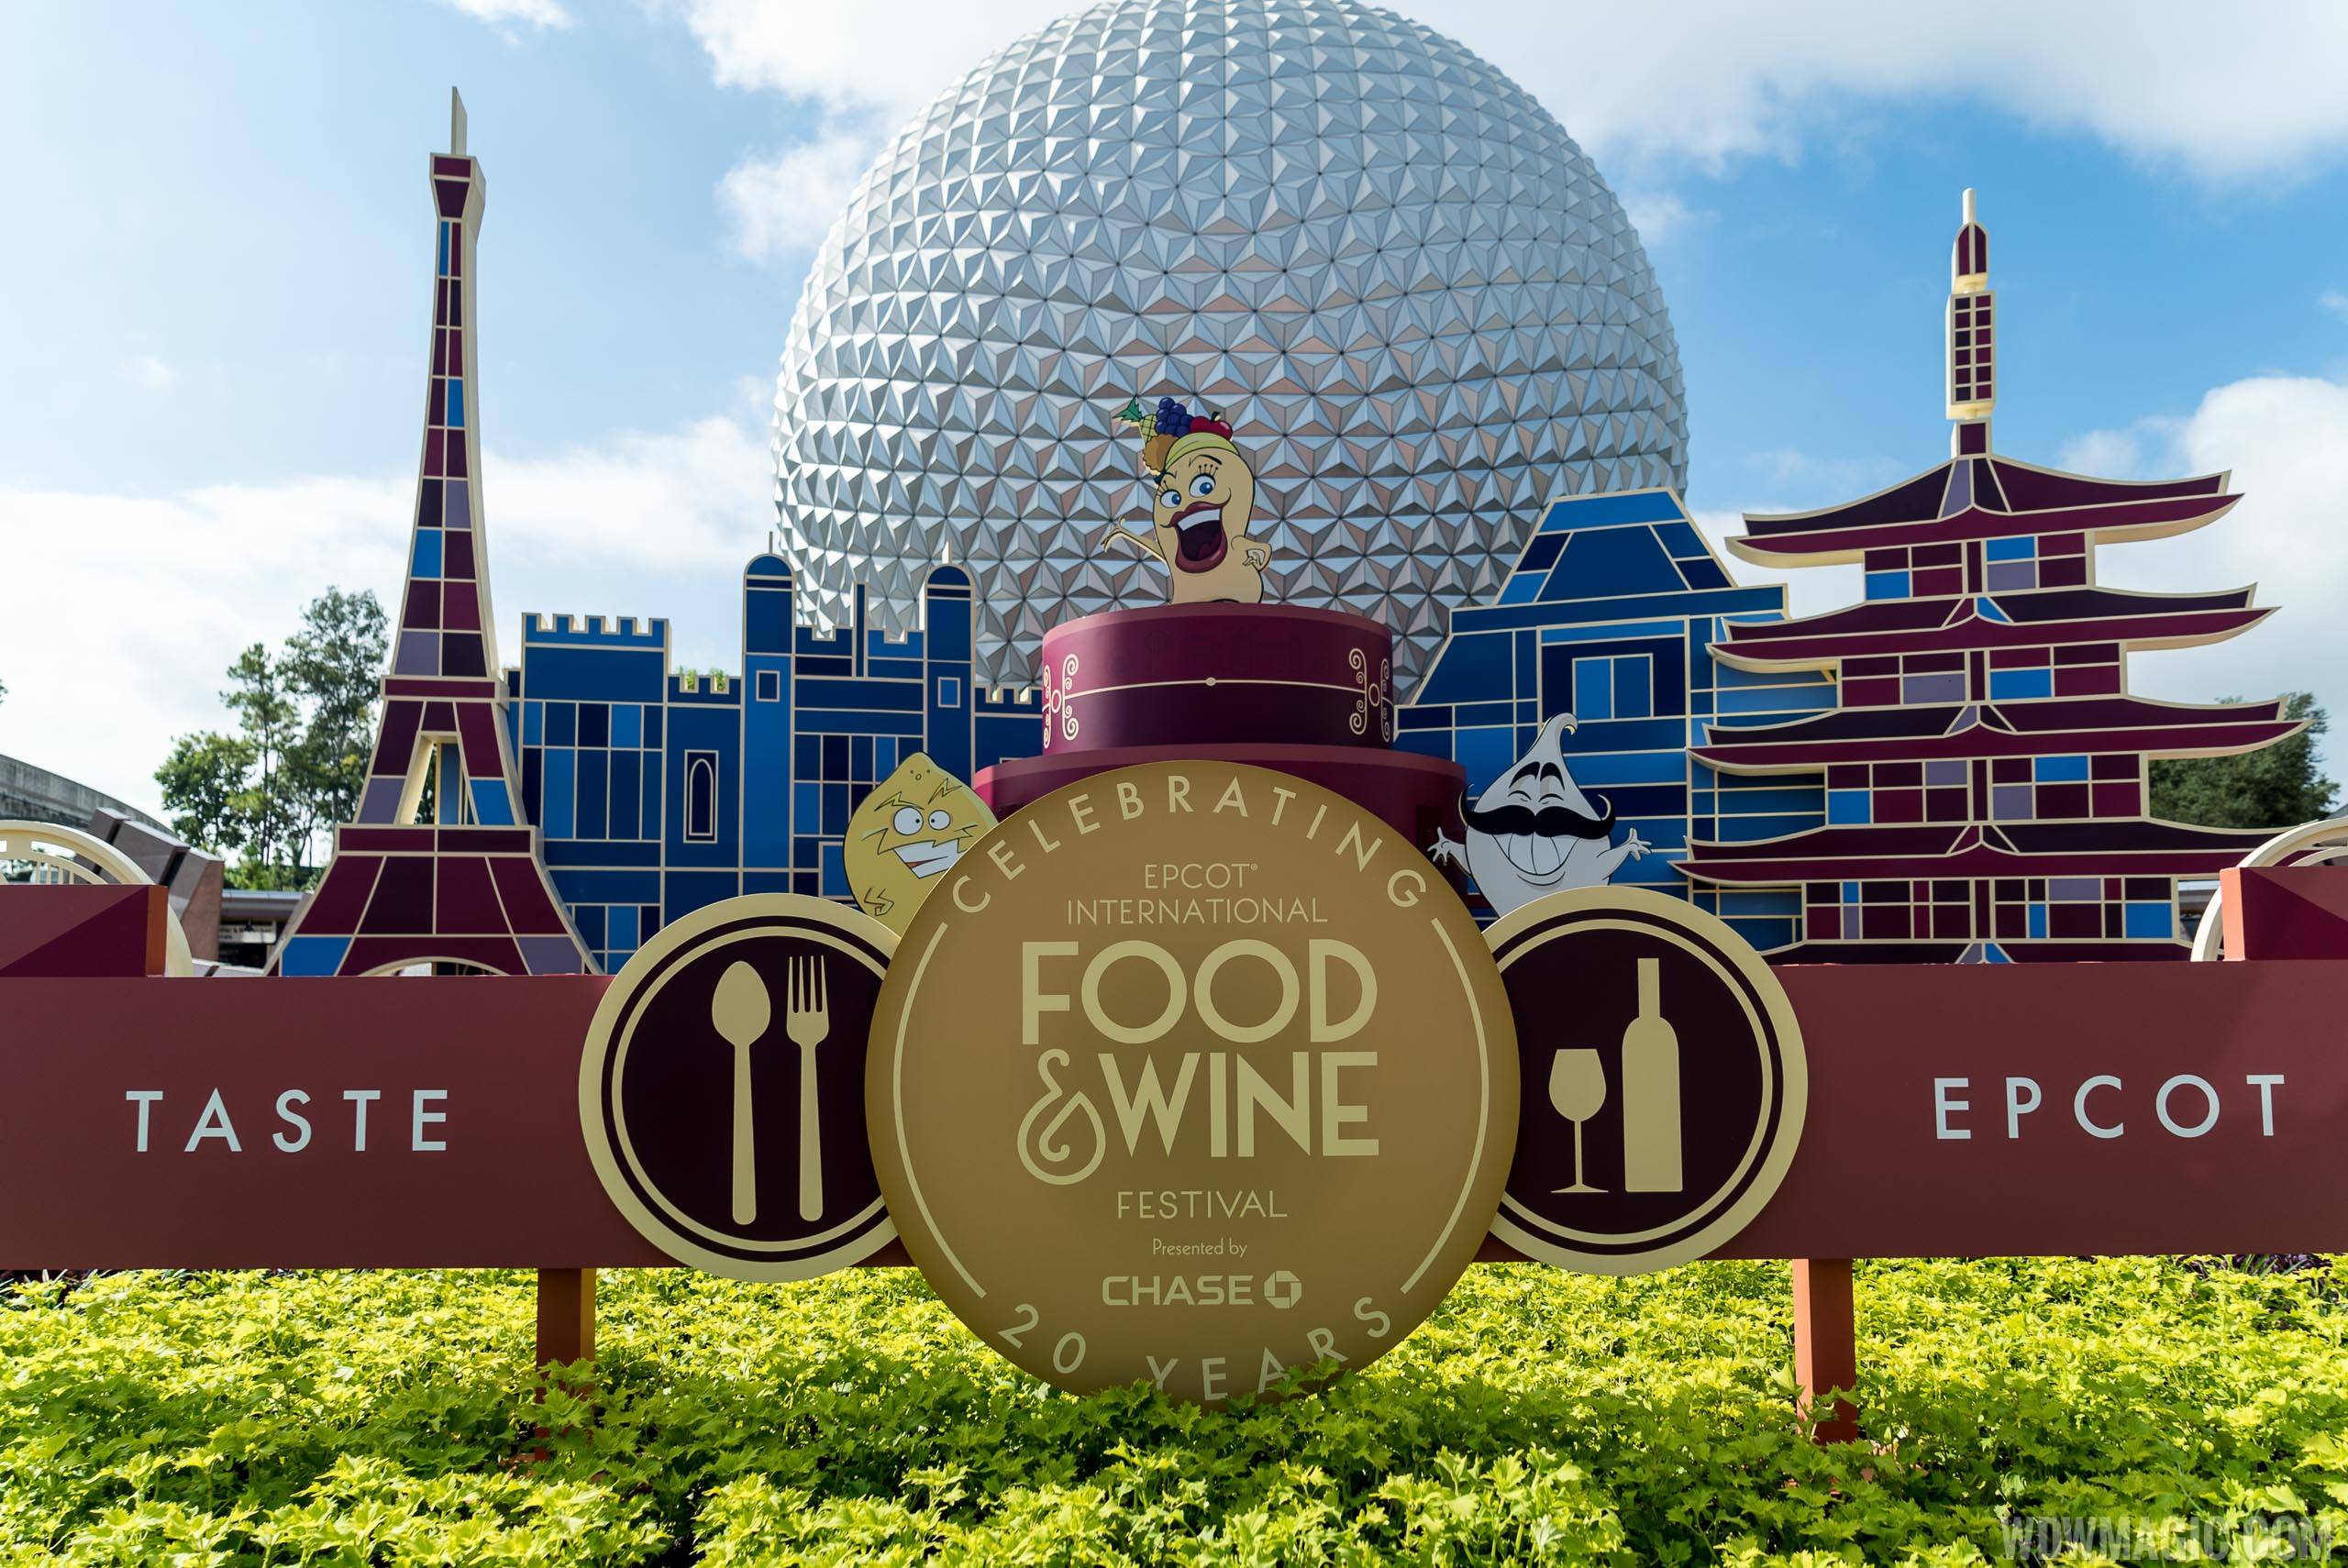 PHOTOS - First tastes at Epcot's new Food and Wine Festival 'Next Eats' kiosks